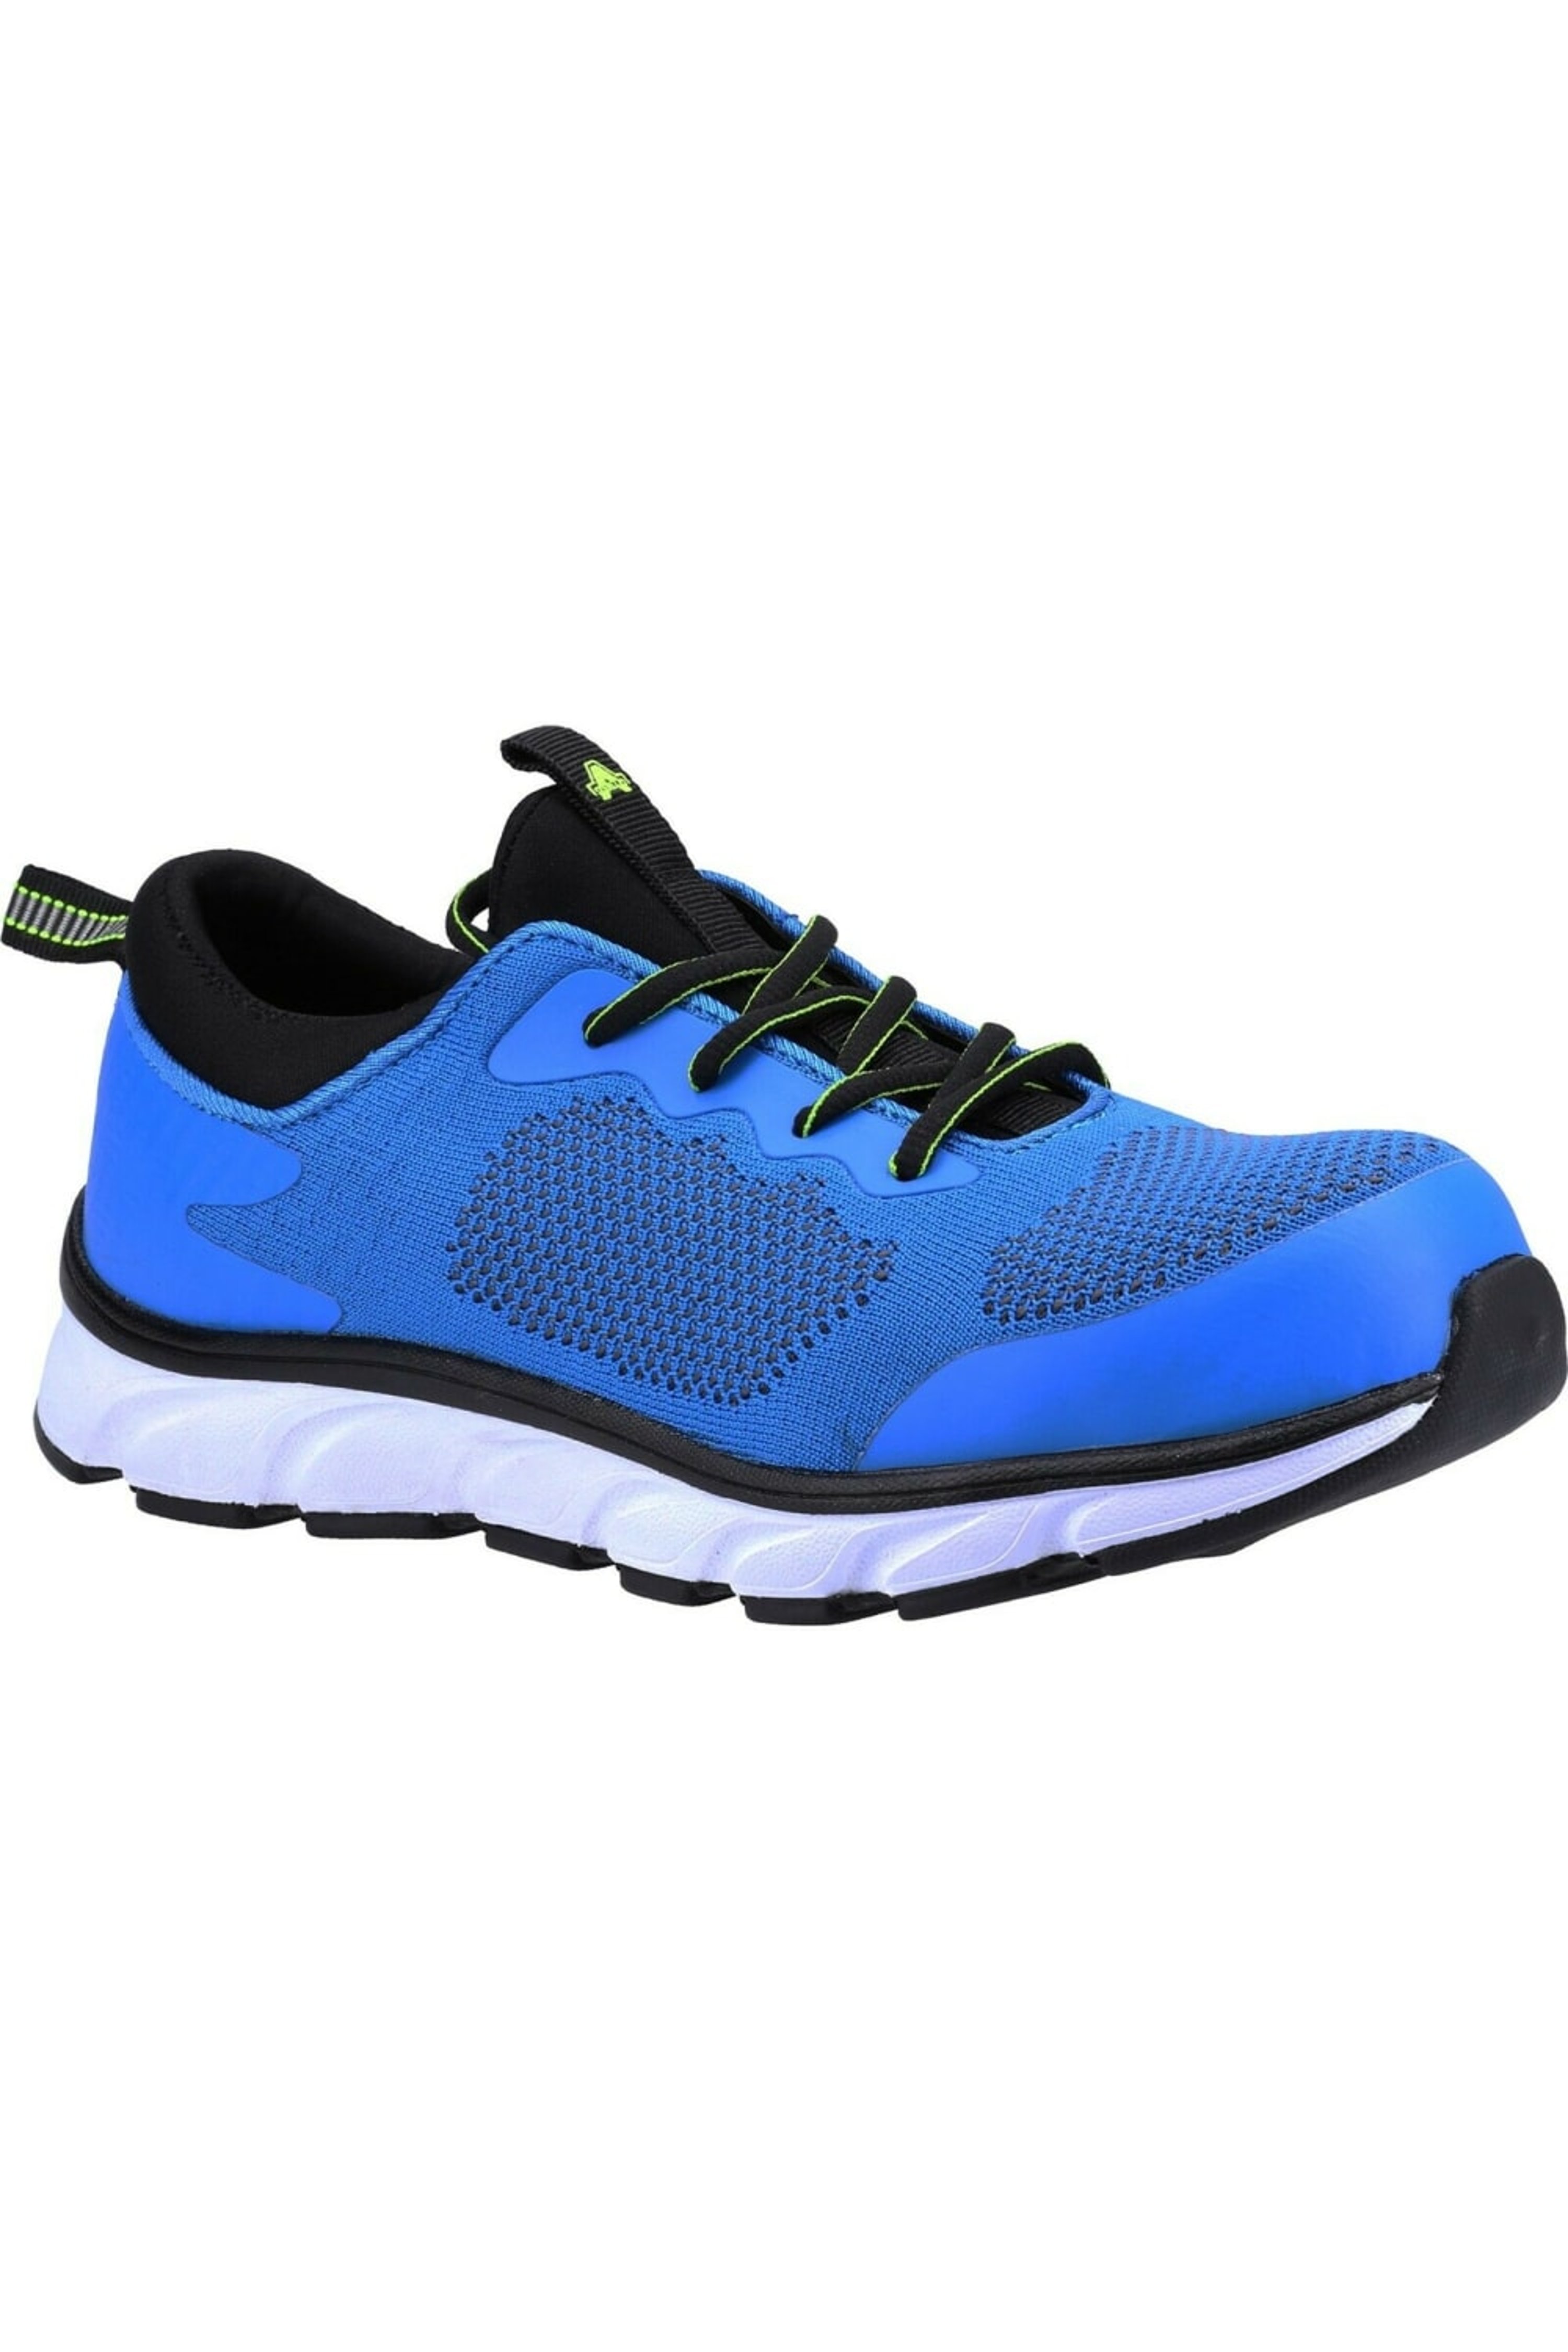 Amblers Unisex Adult 718 Safety Shoes In Blue